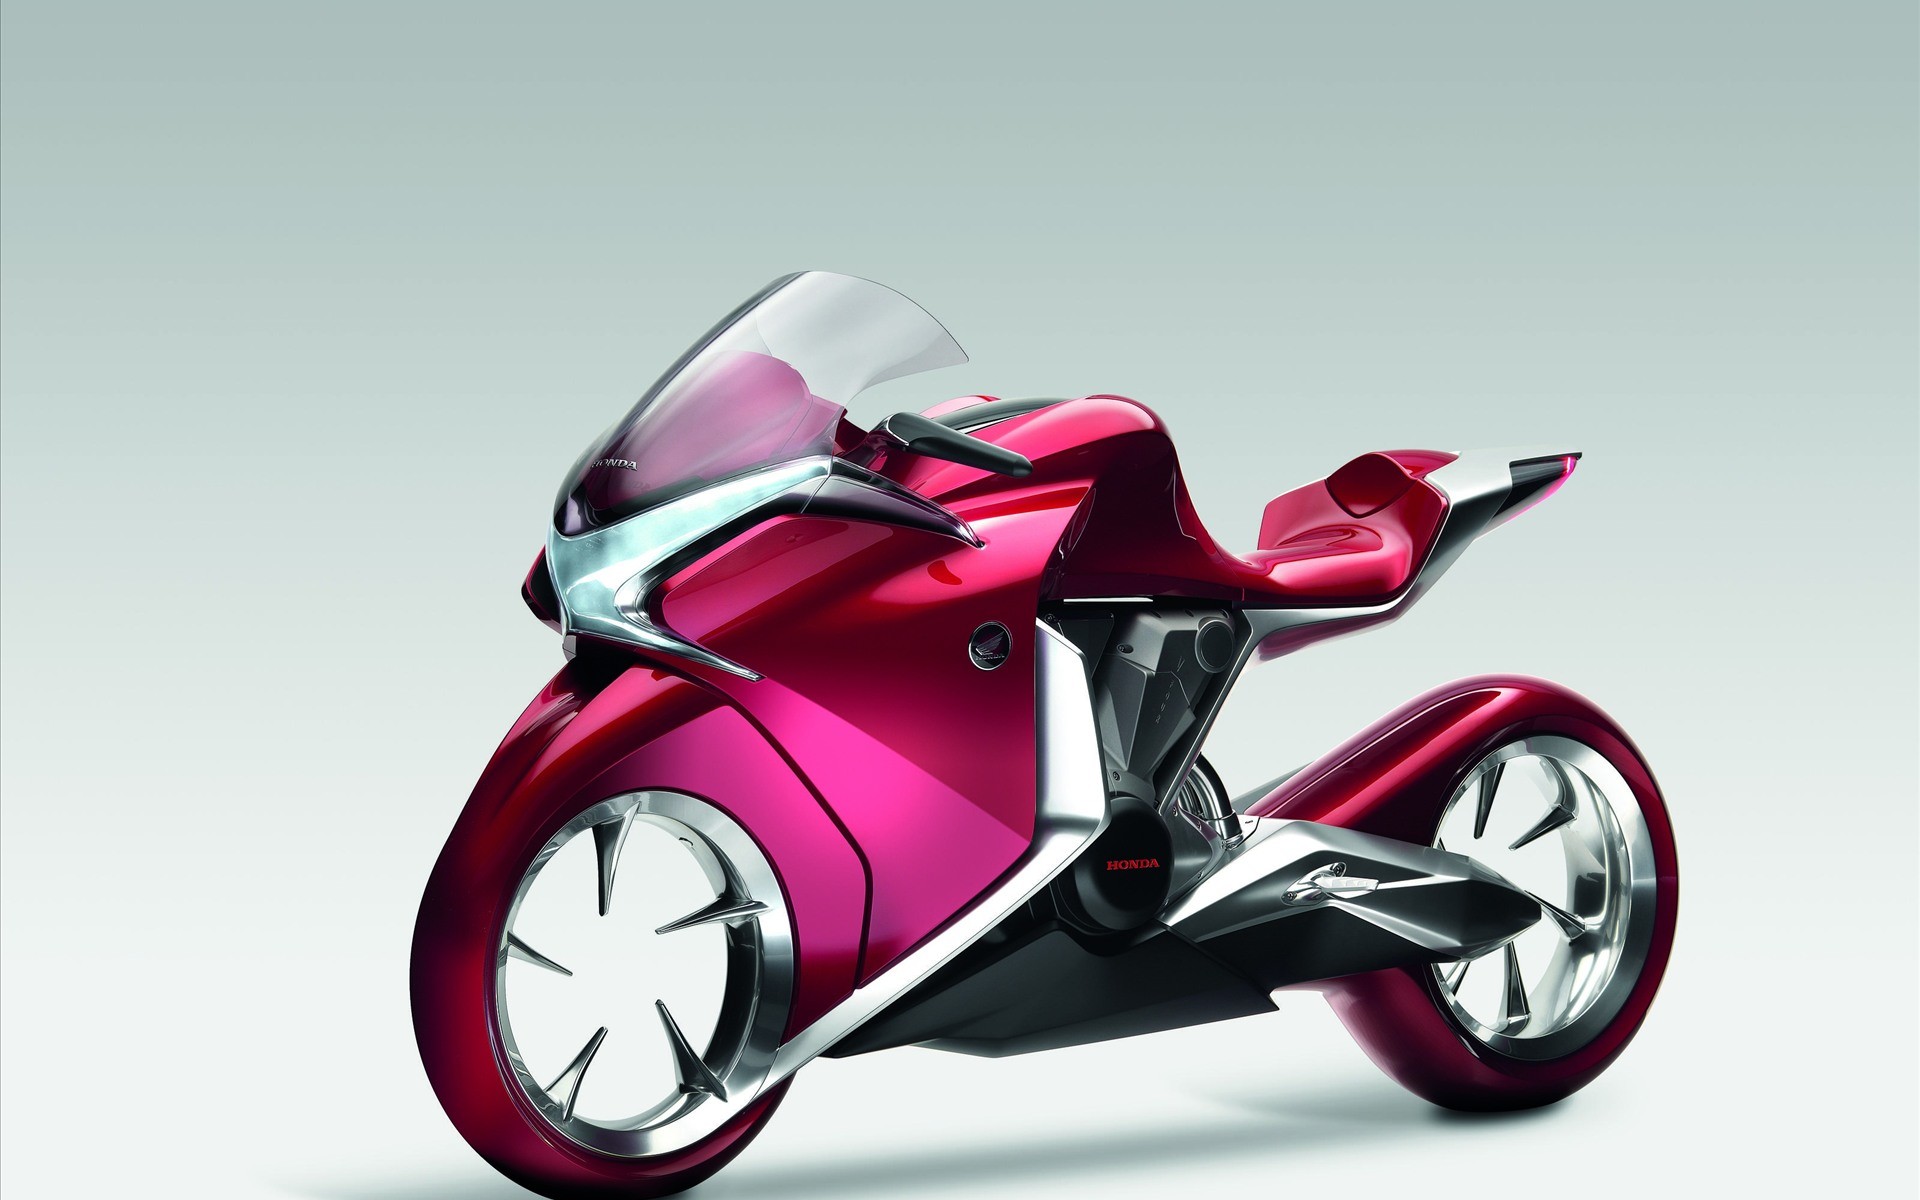 1920x1200 Honda Future Motorcycle The Honda Concept motorcycle gives us an idea of  what the future holds for this vehicle maker. By the time this hits the  market, ...